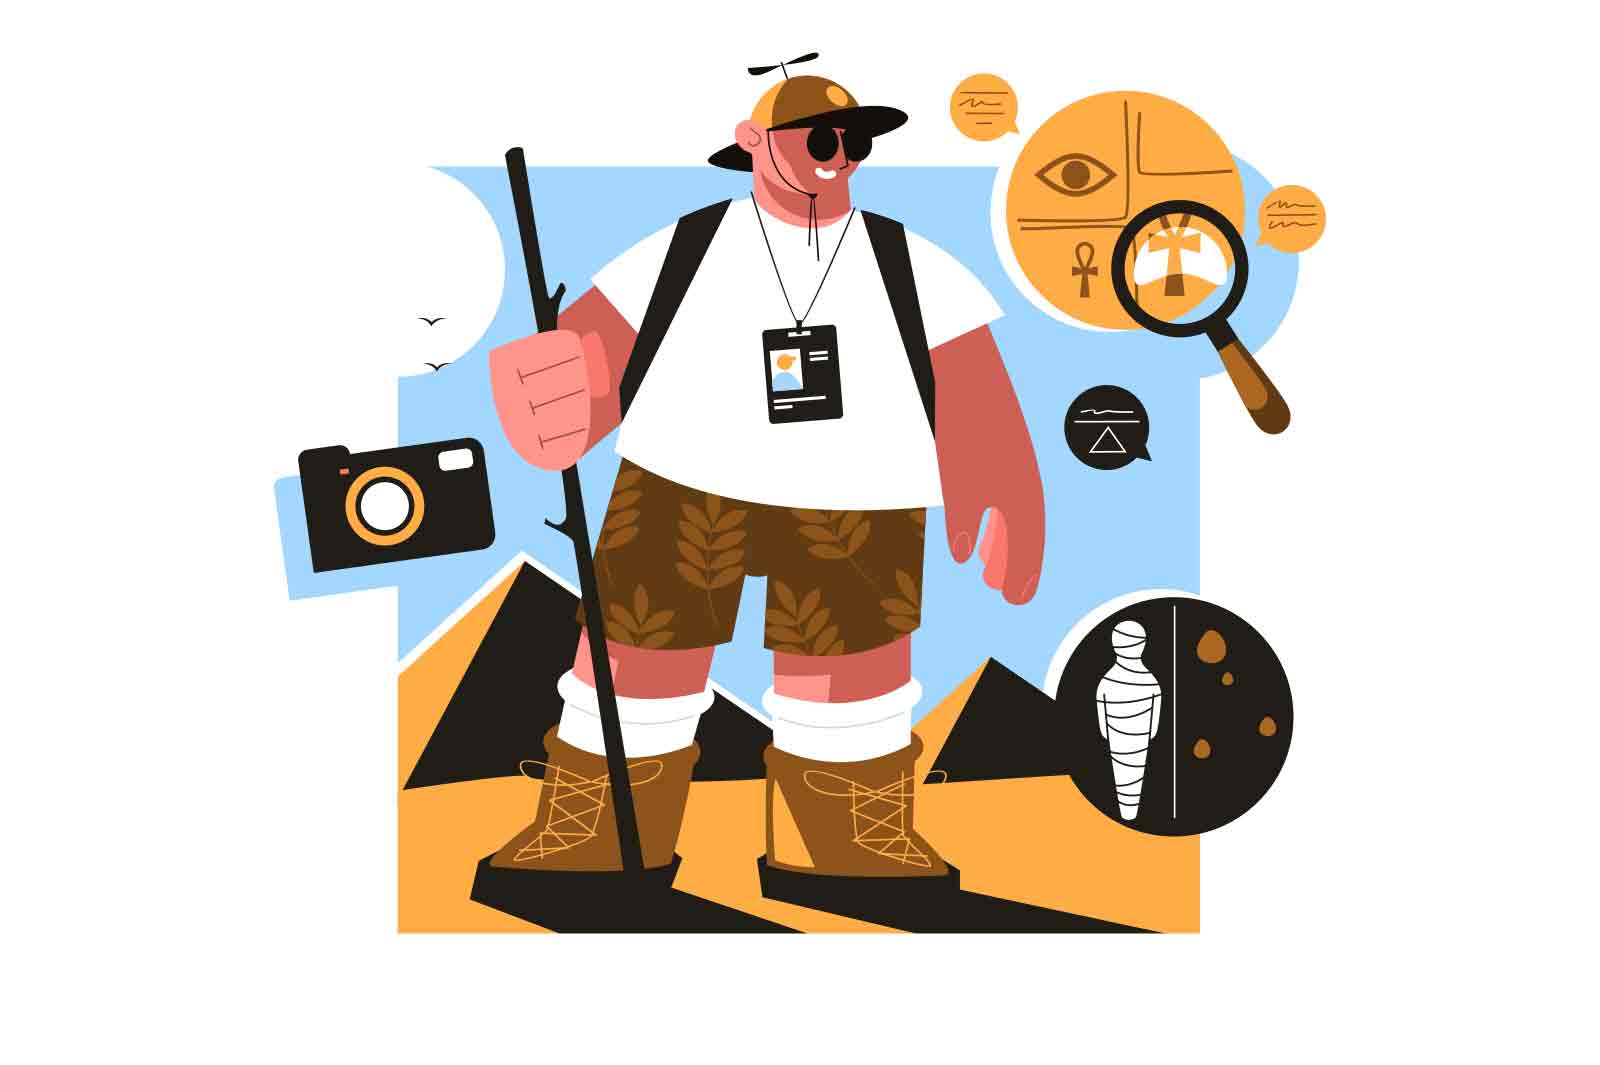 Guy tourist at egyptian pharaohs pyramids complex vector illustration. Ancient historical, famous touristic attractions flat concept